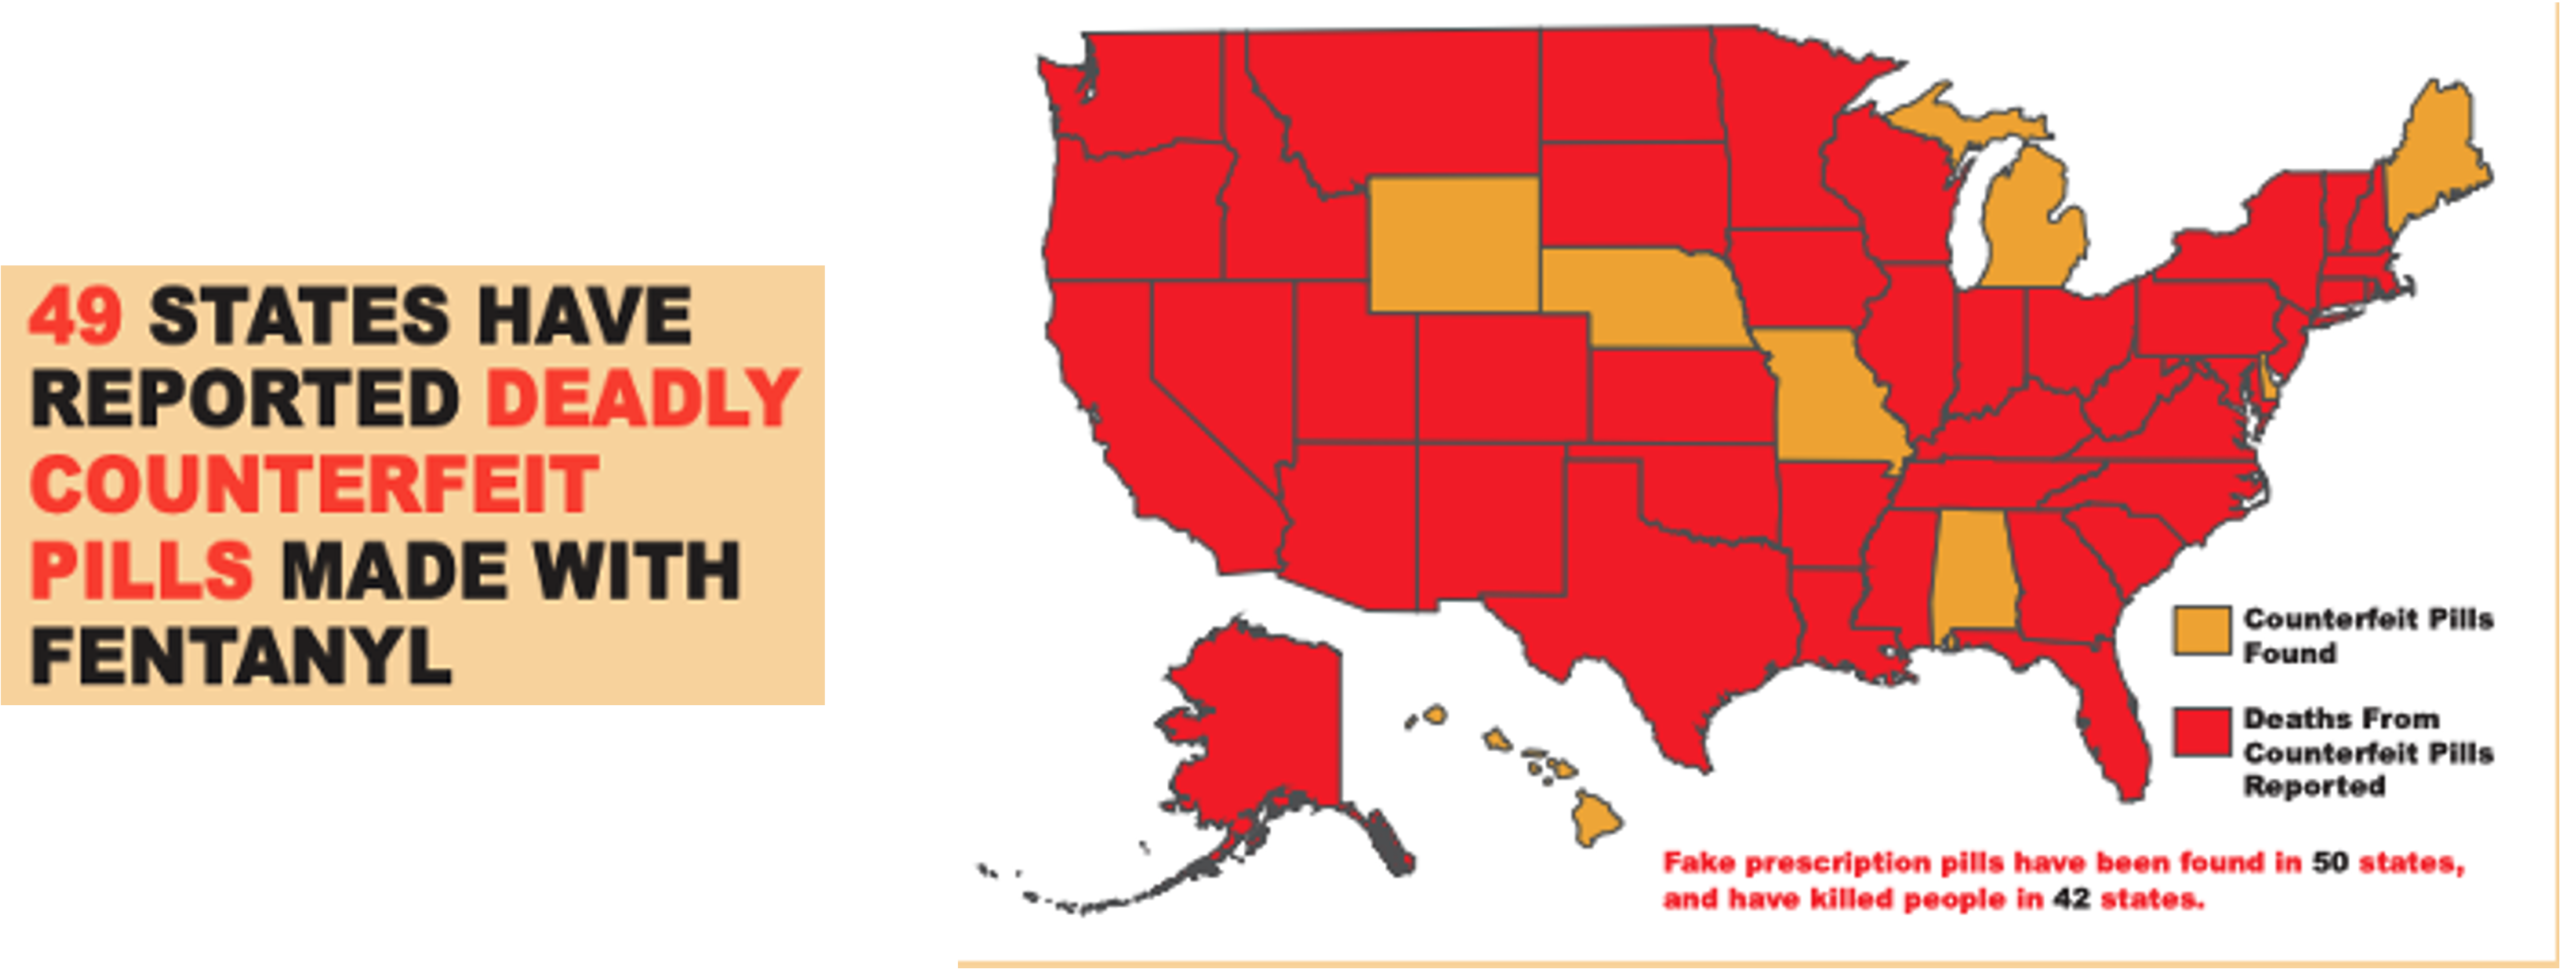 Map showing that deadly counterfeit pills made with fentanyl are 49 states.